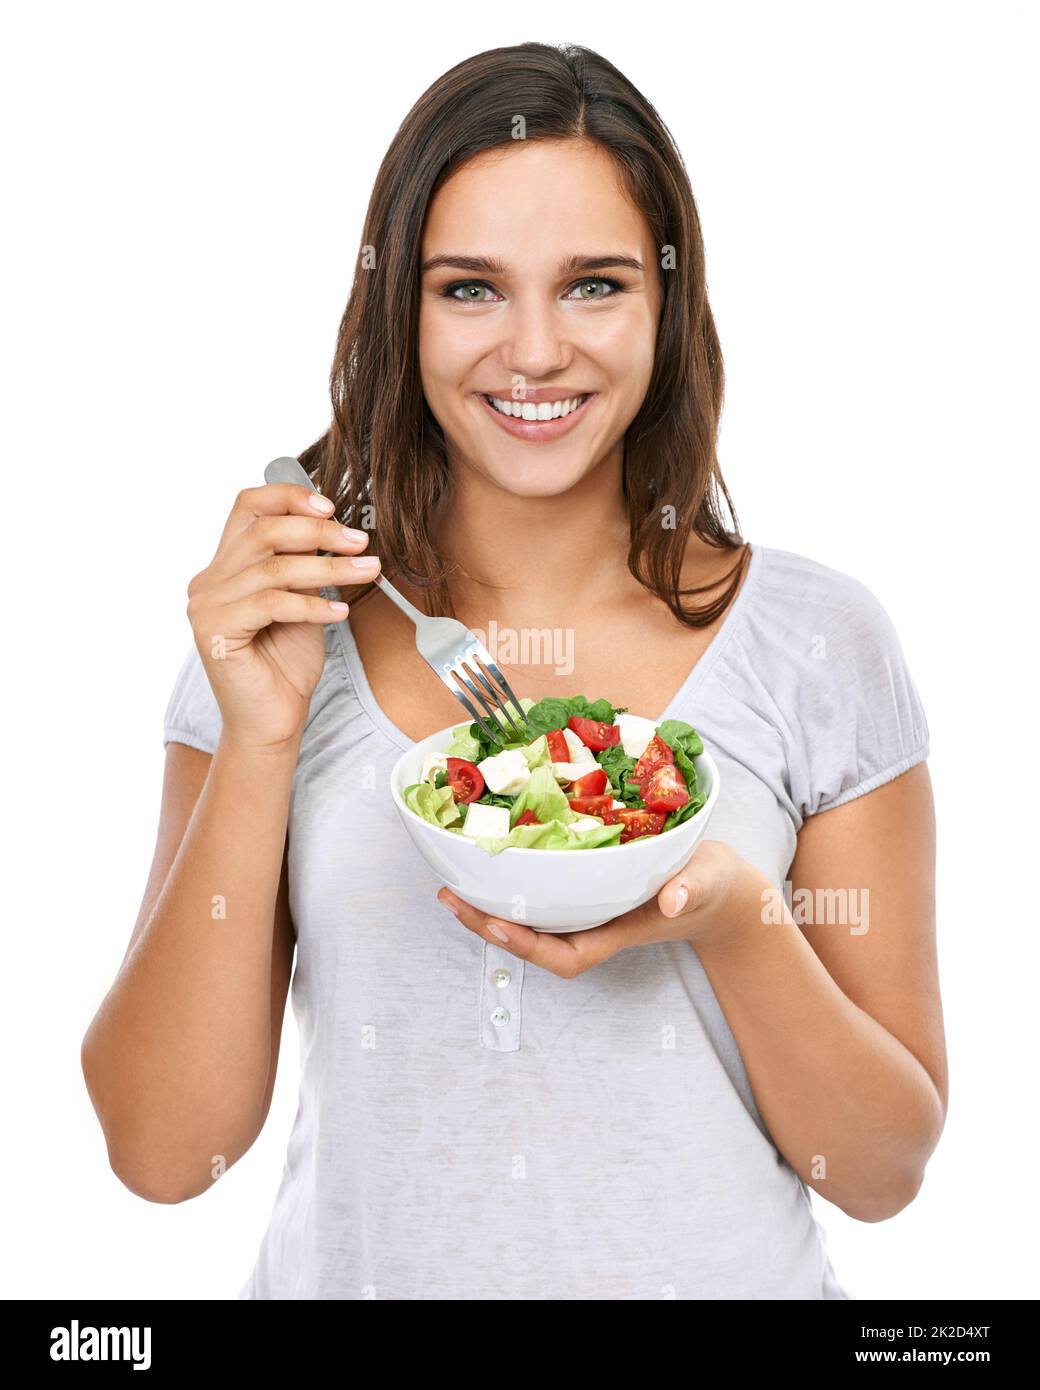 Enjoying a healthy snack. A young woman enjoying a fresh salad isolated on white. Stock Photo